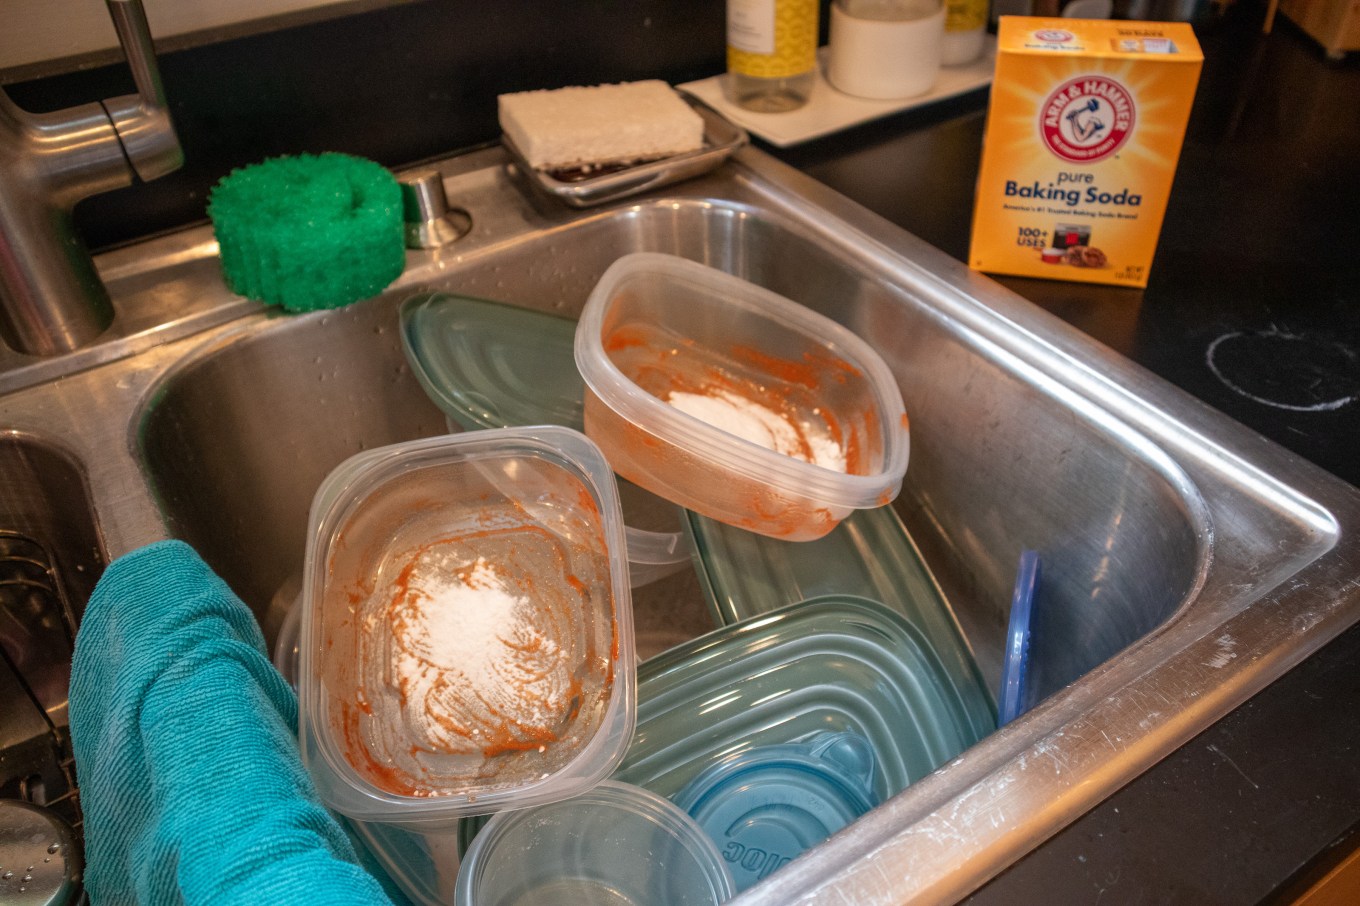 Baking soda being used in Tupperware containers to clean them.